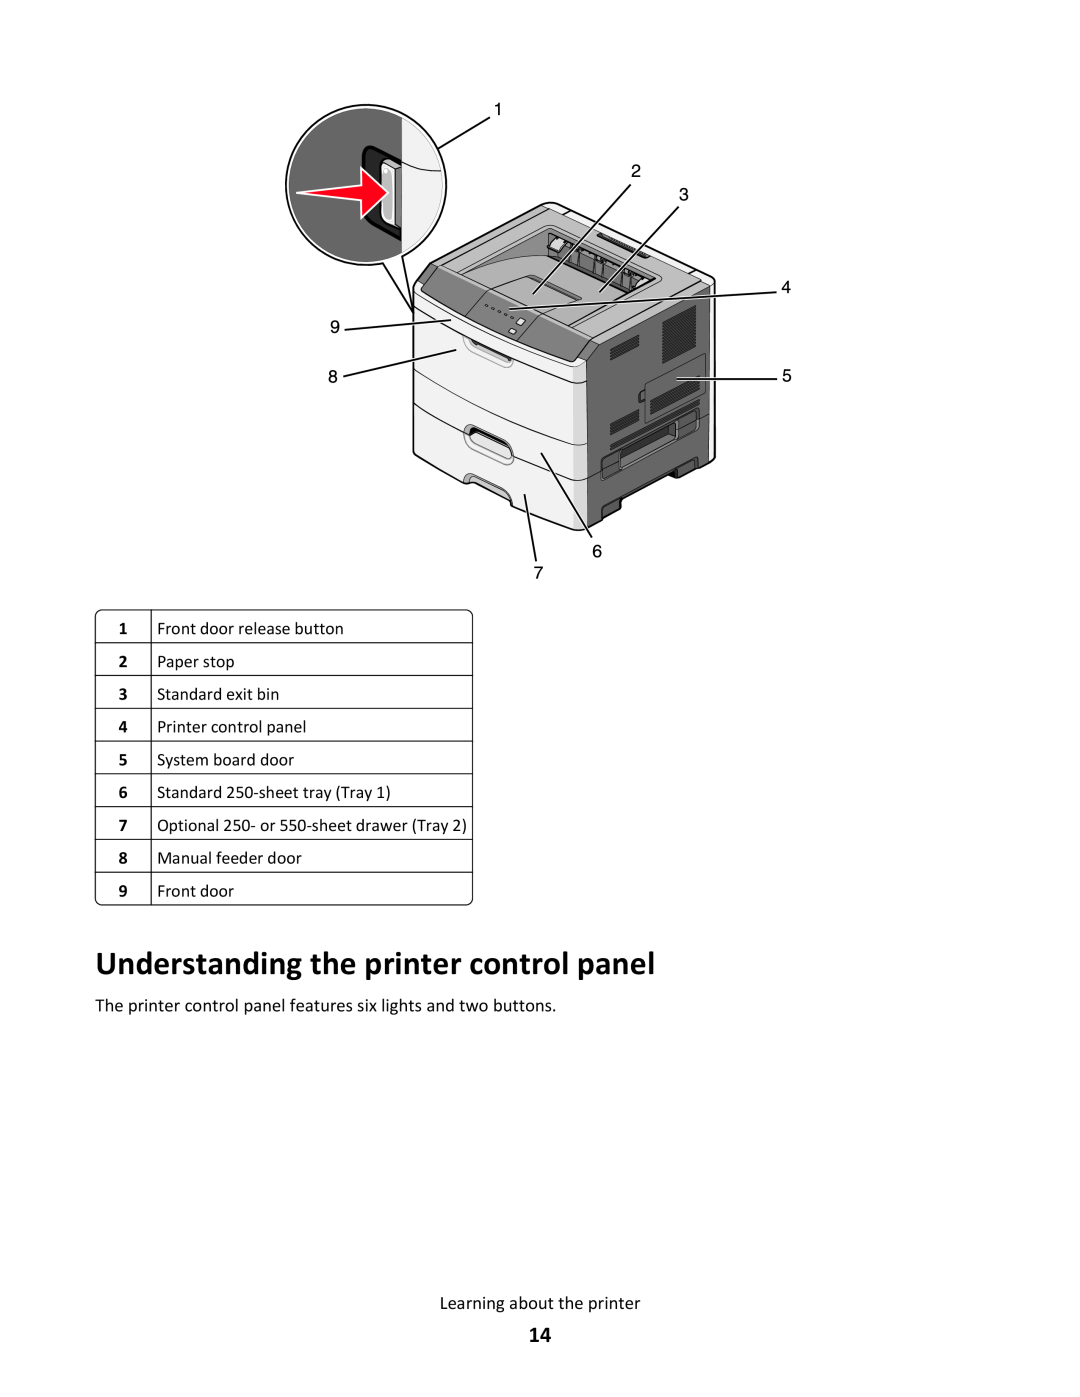 Lexmark 34S0300 Understanding the printer control panel, The printer control panel features six lights and two buttons 